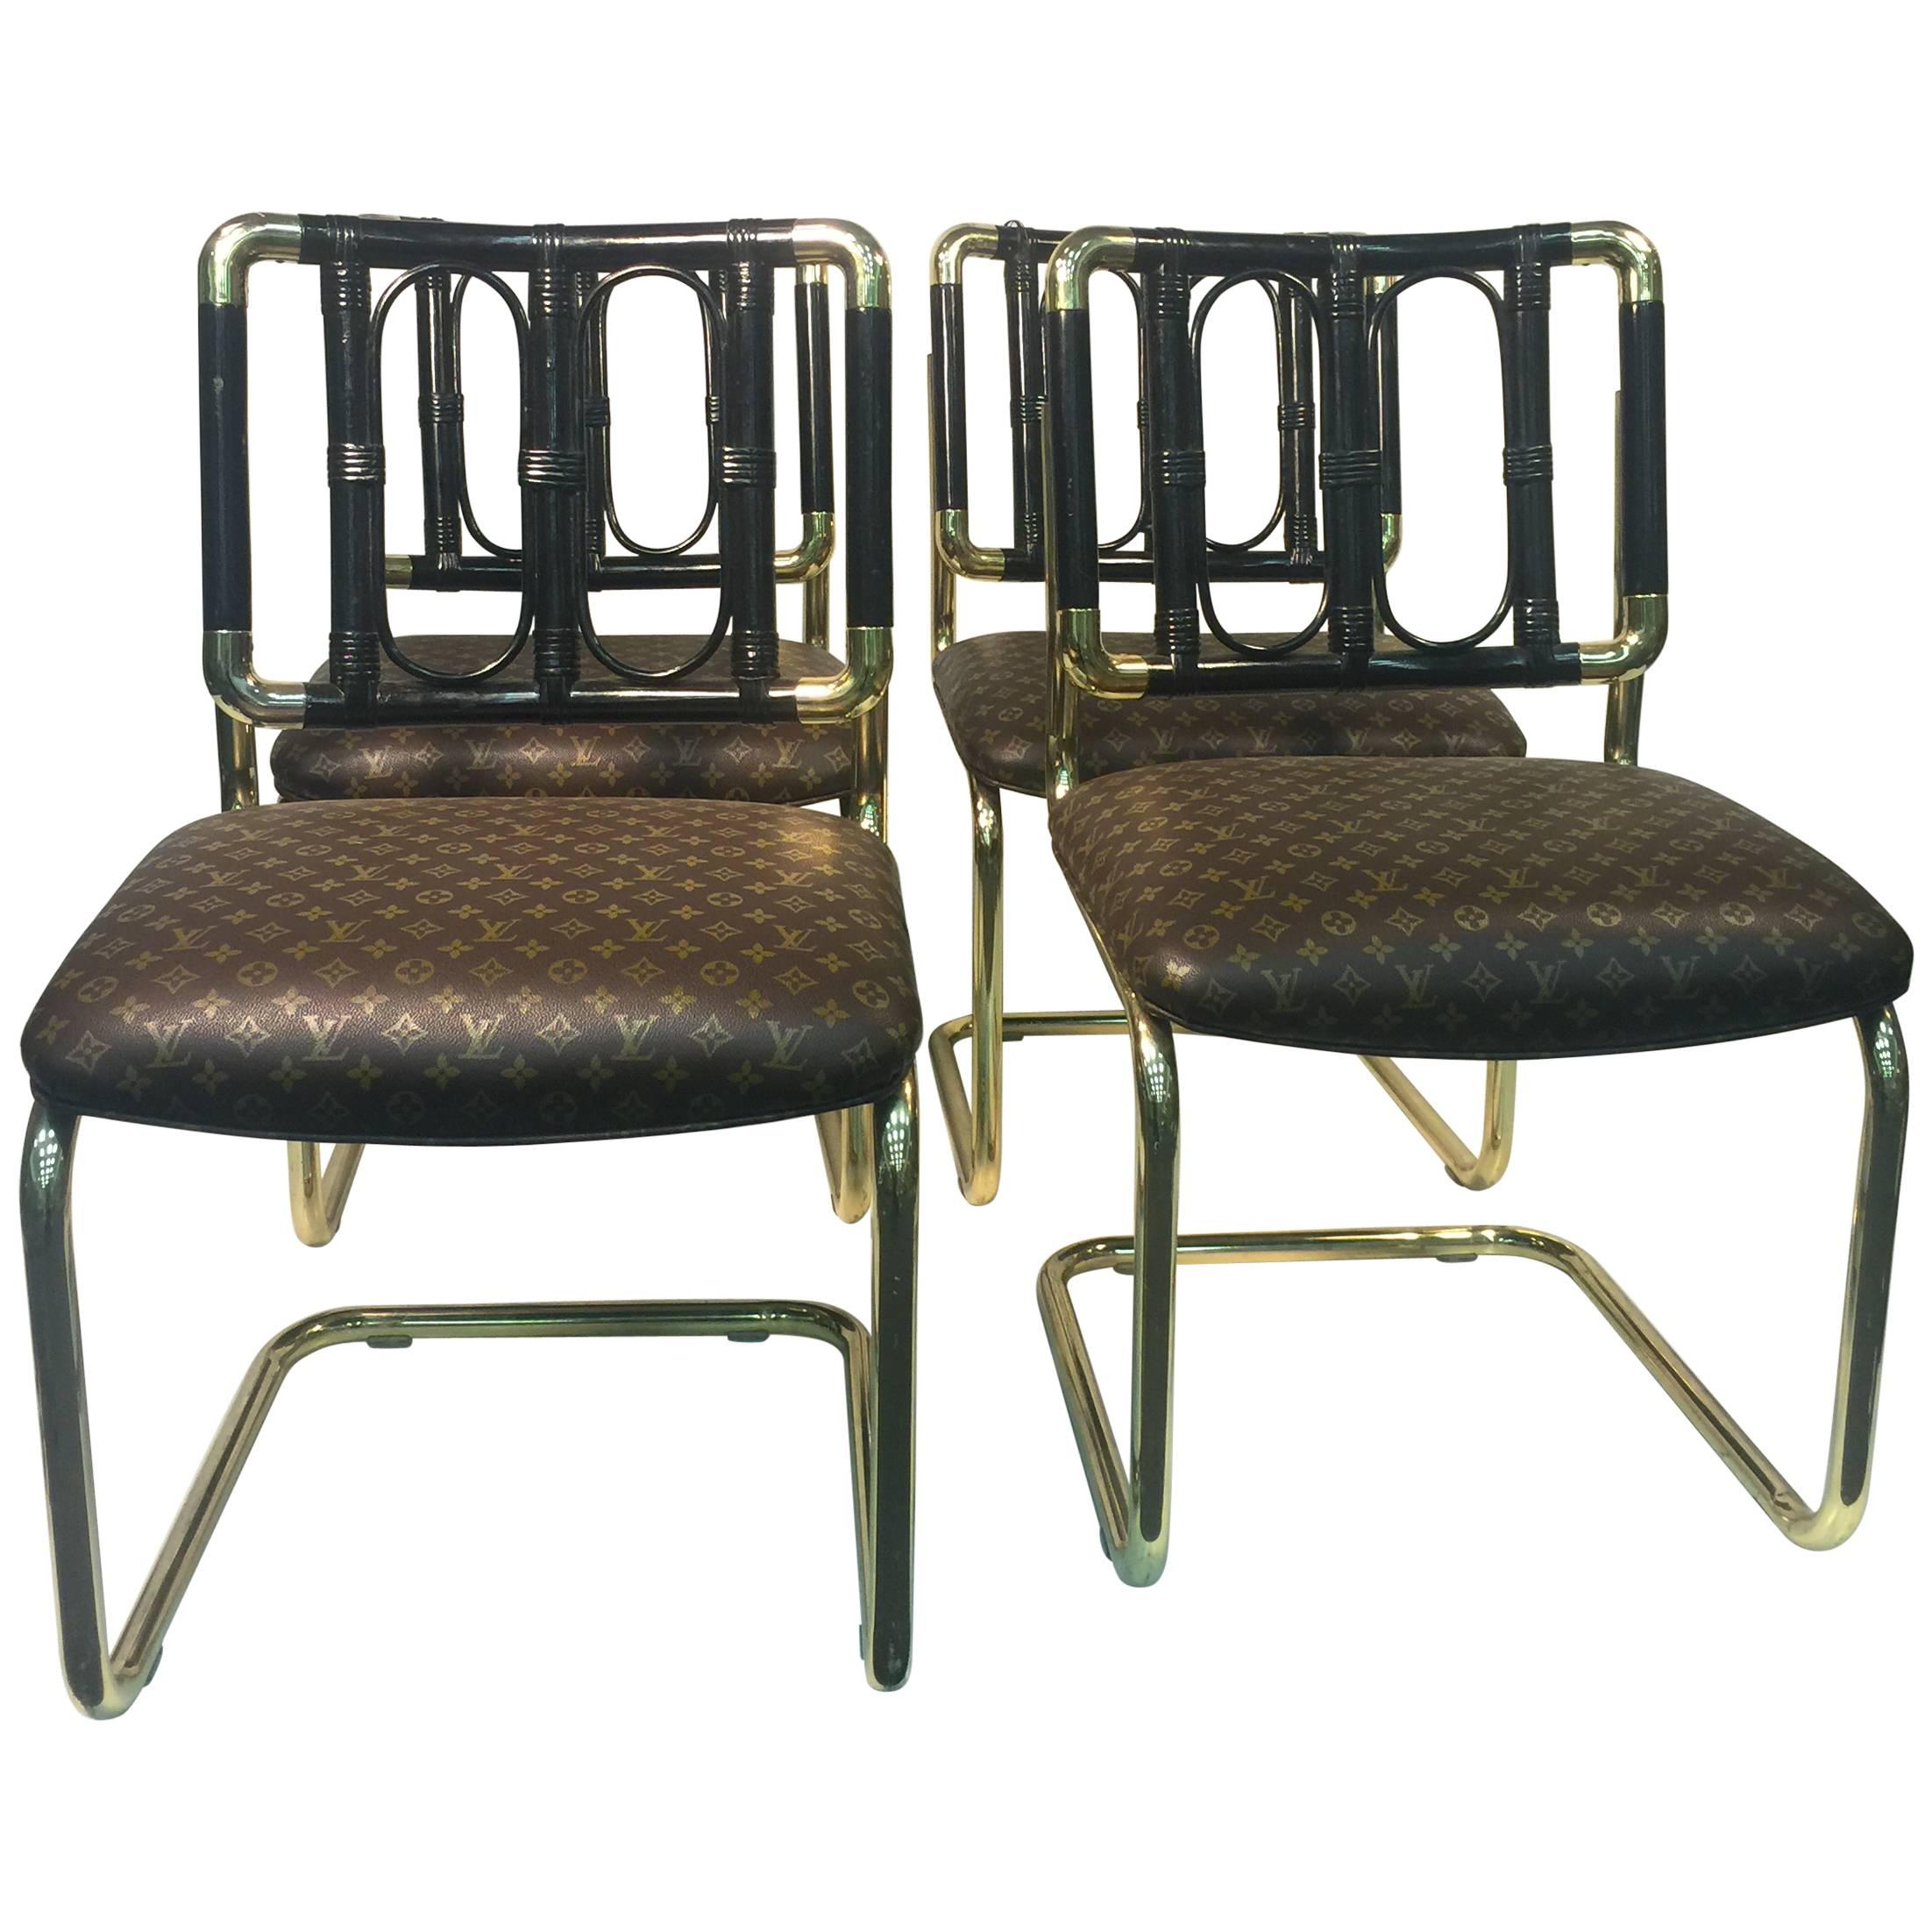 Luxurious Set of Four Brass Italian Chairs Upholstered in Louis Vuitton Leather For Sale